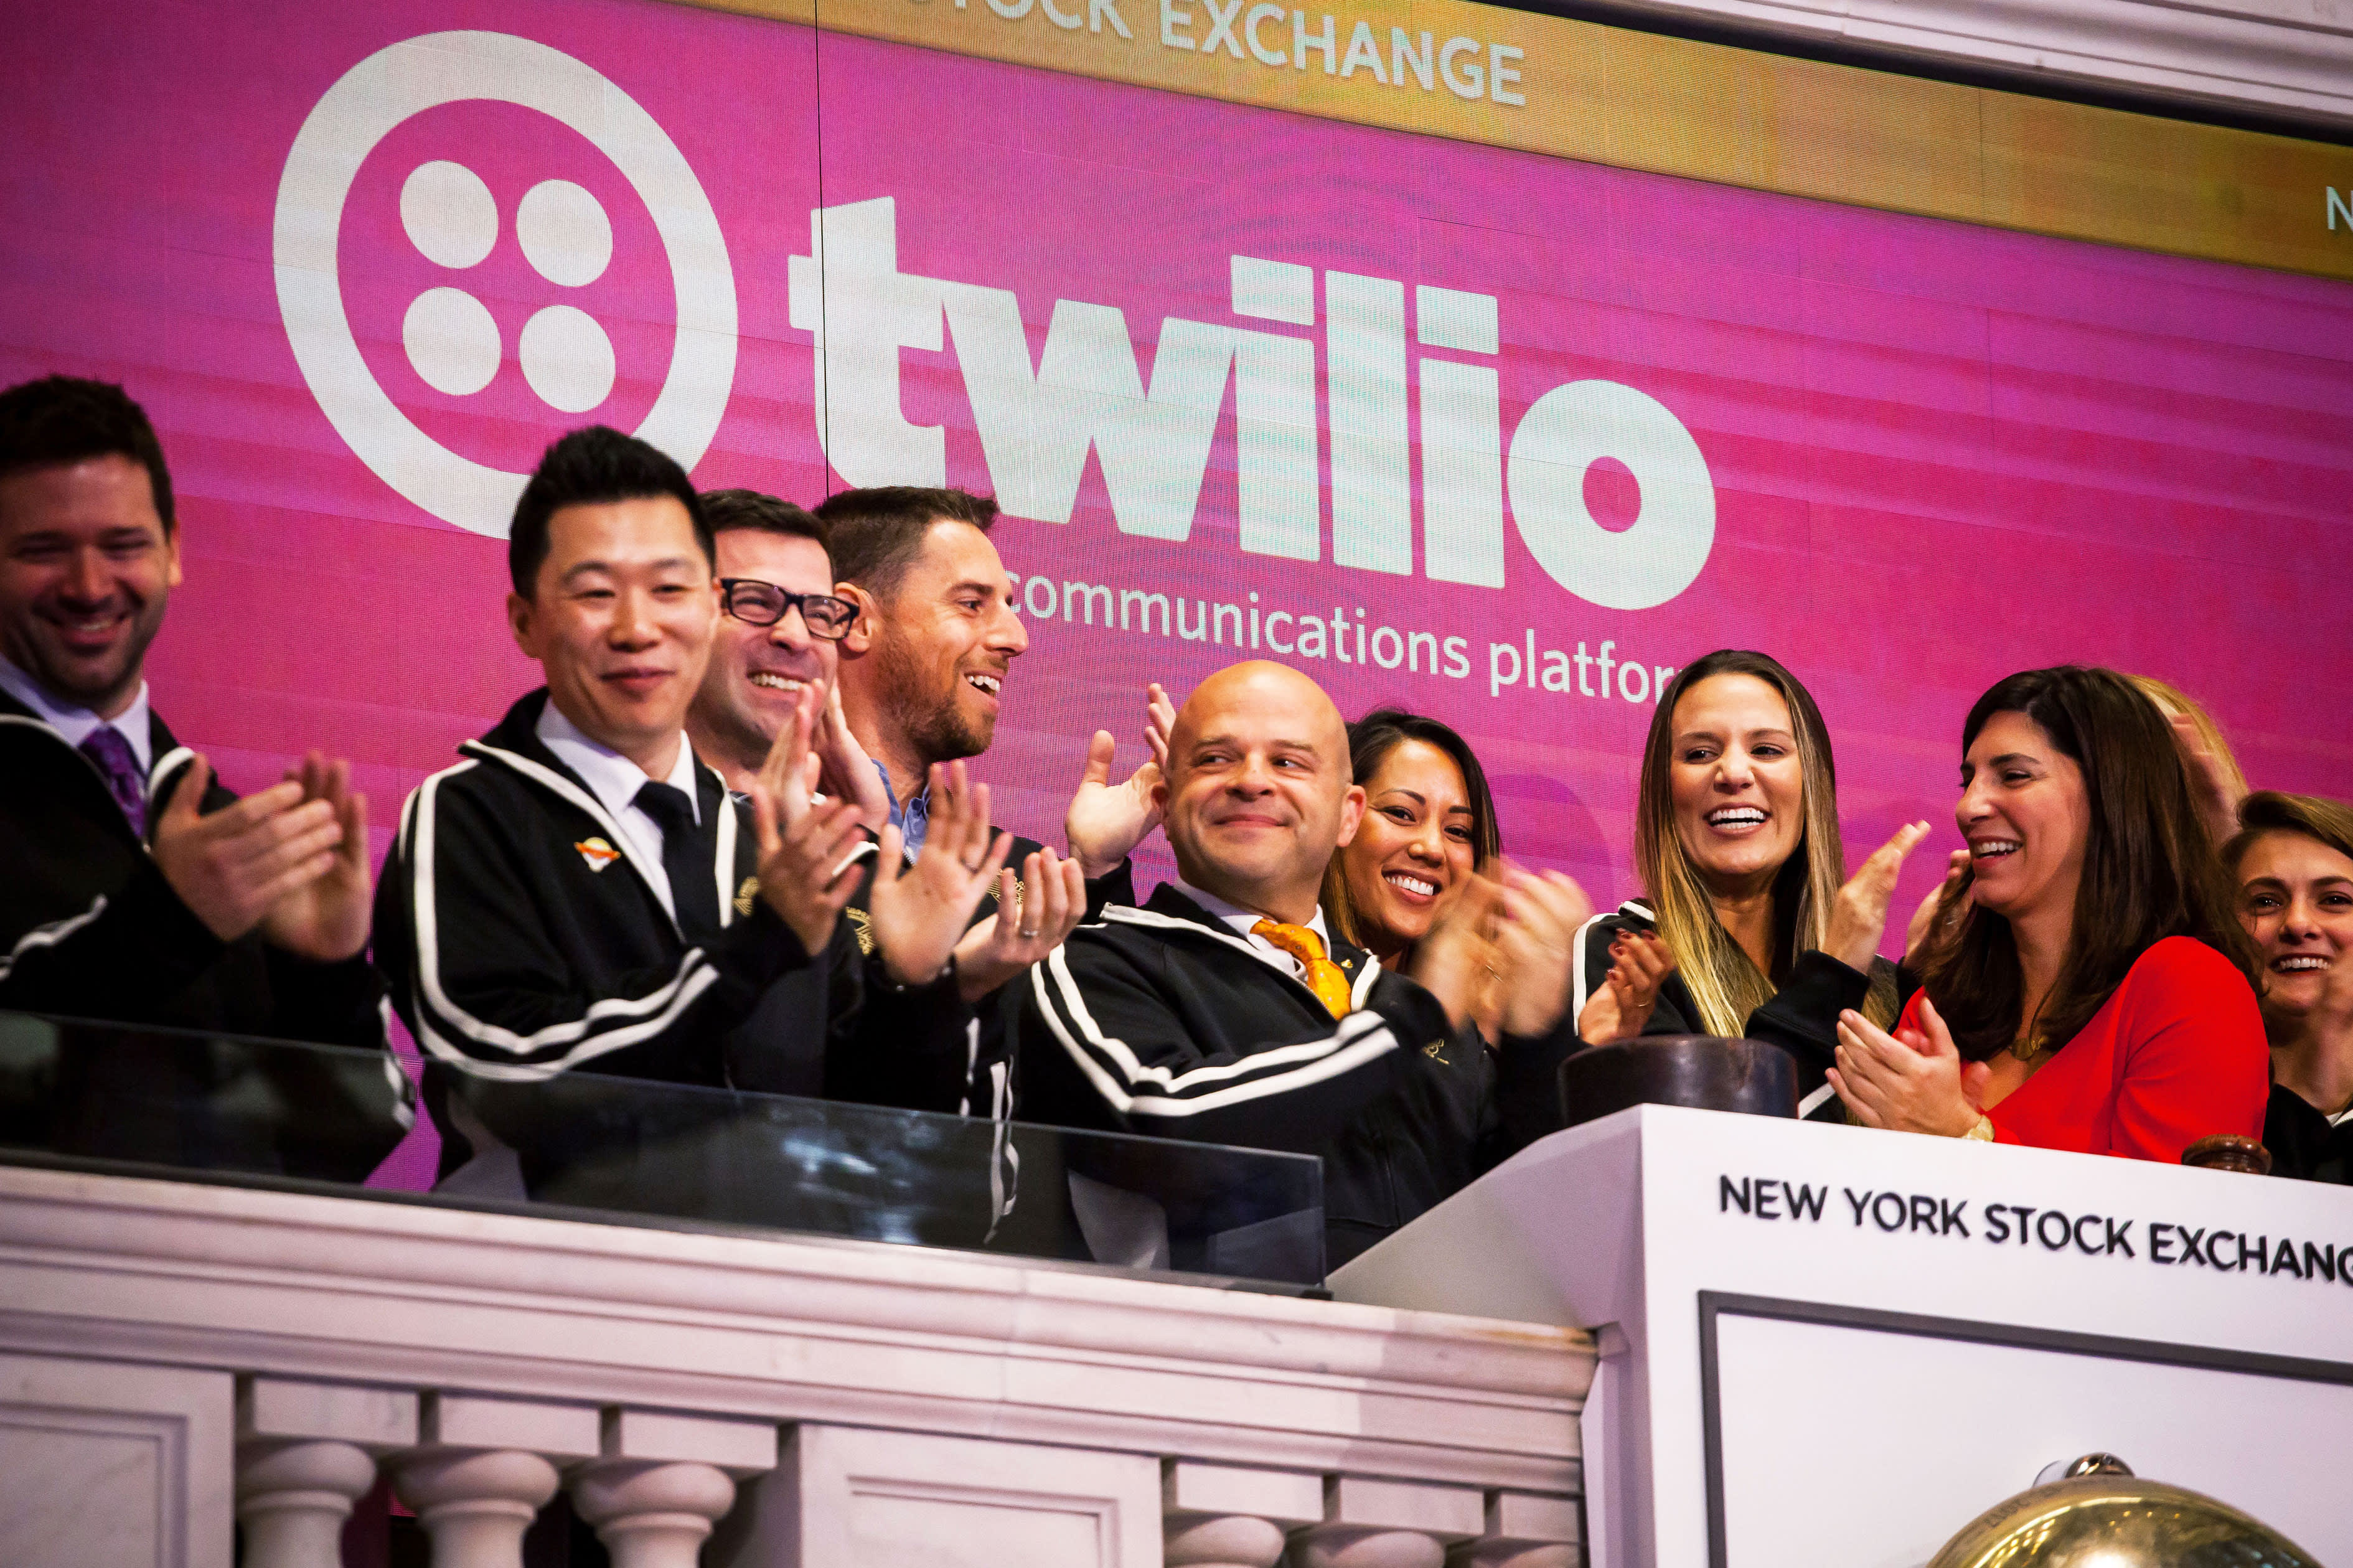 The US government should consider regulating news algorithms, says Twilio CEO